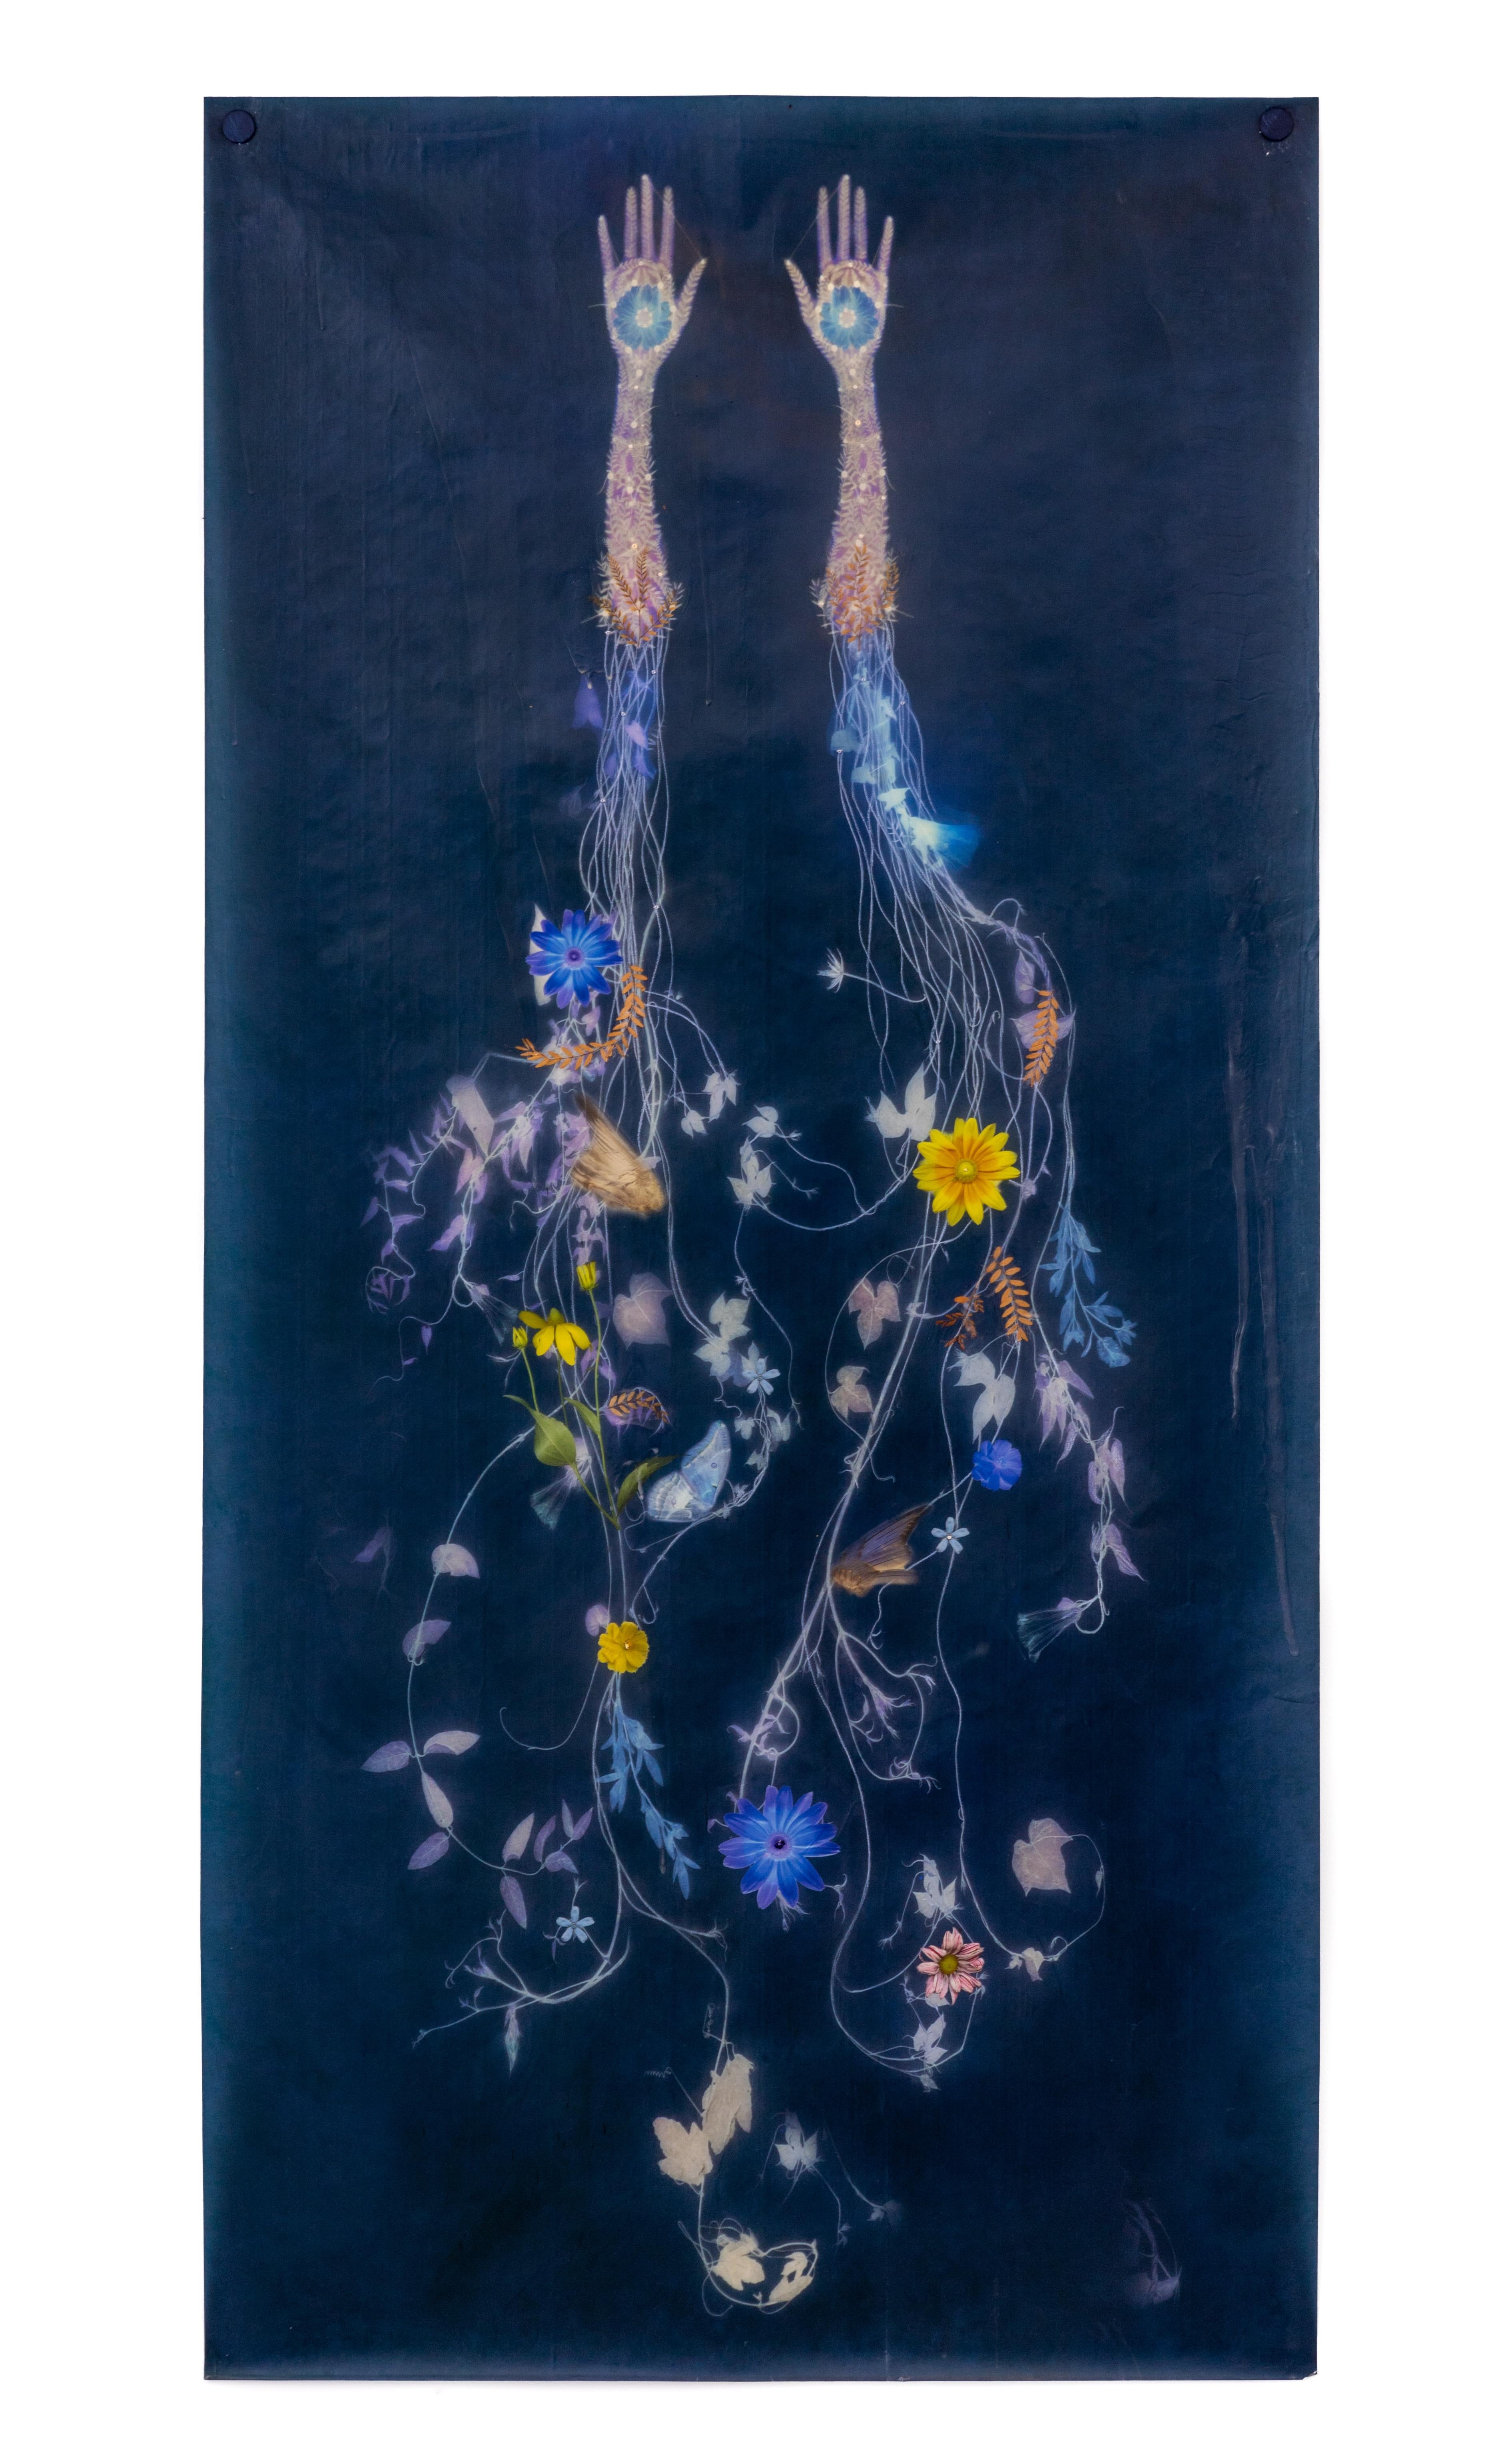 Sisters #4 (Contemporary Vertical Indigo Panel of Hands and Botanicals, Waxed)